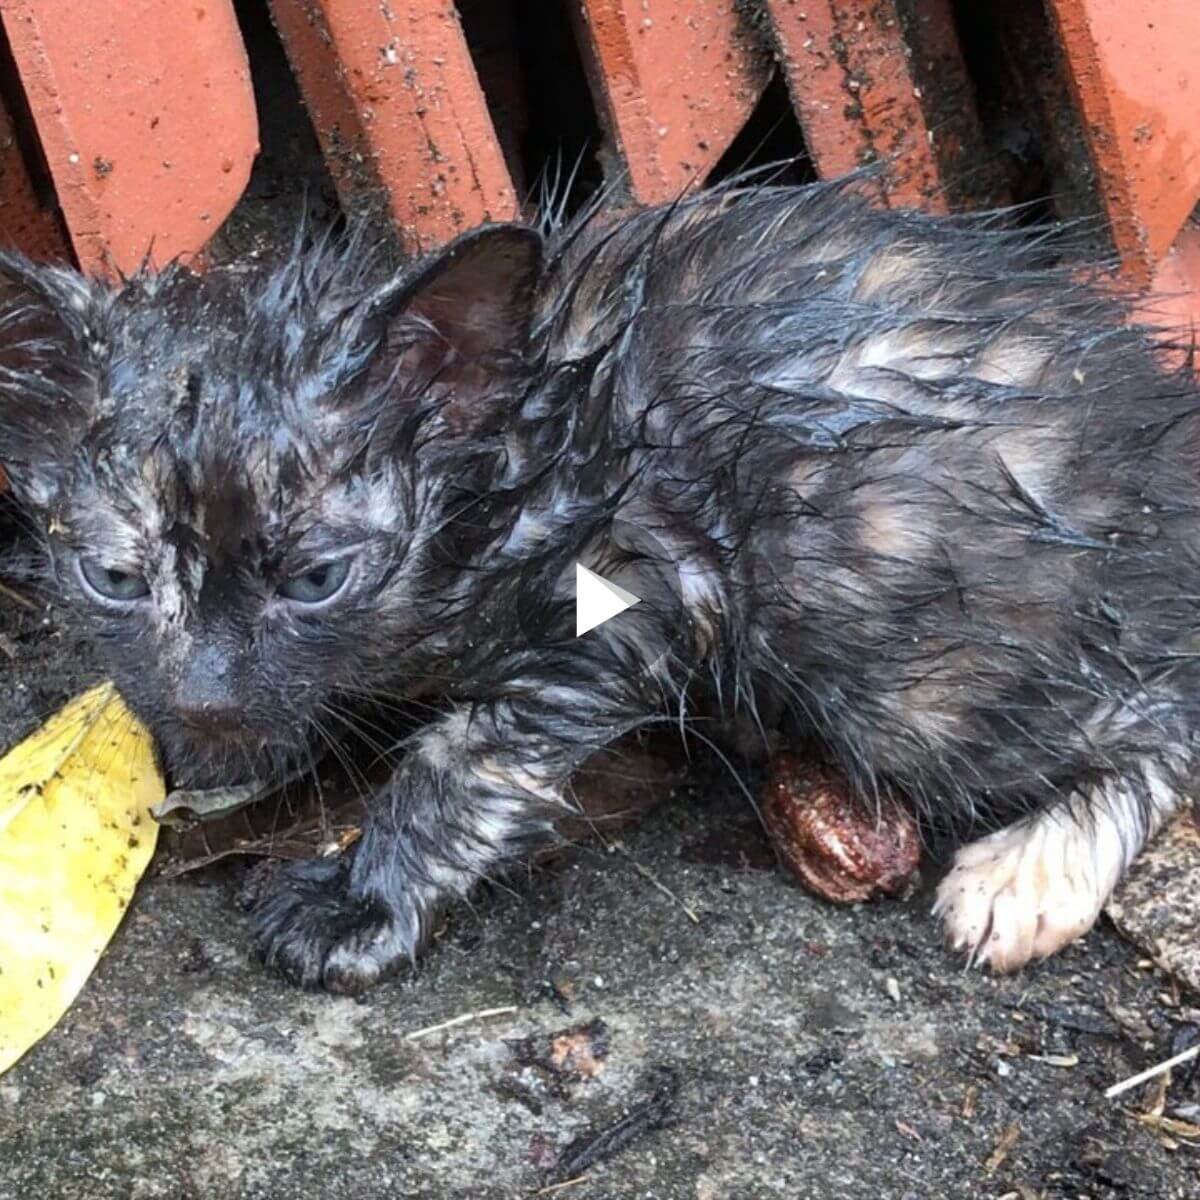 Homeless kittens wandered the streets after the rain and called out for their mother